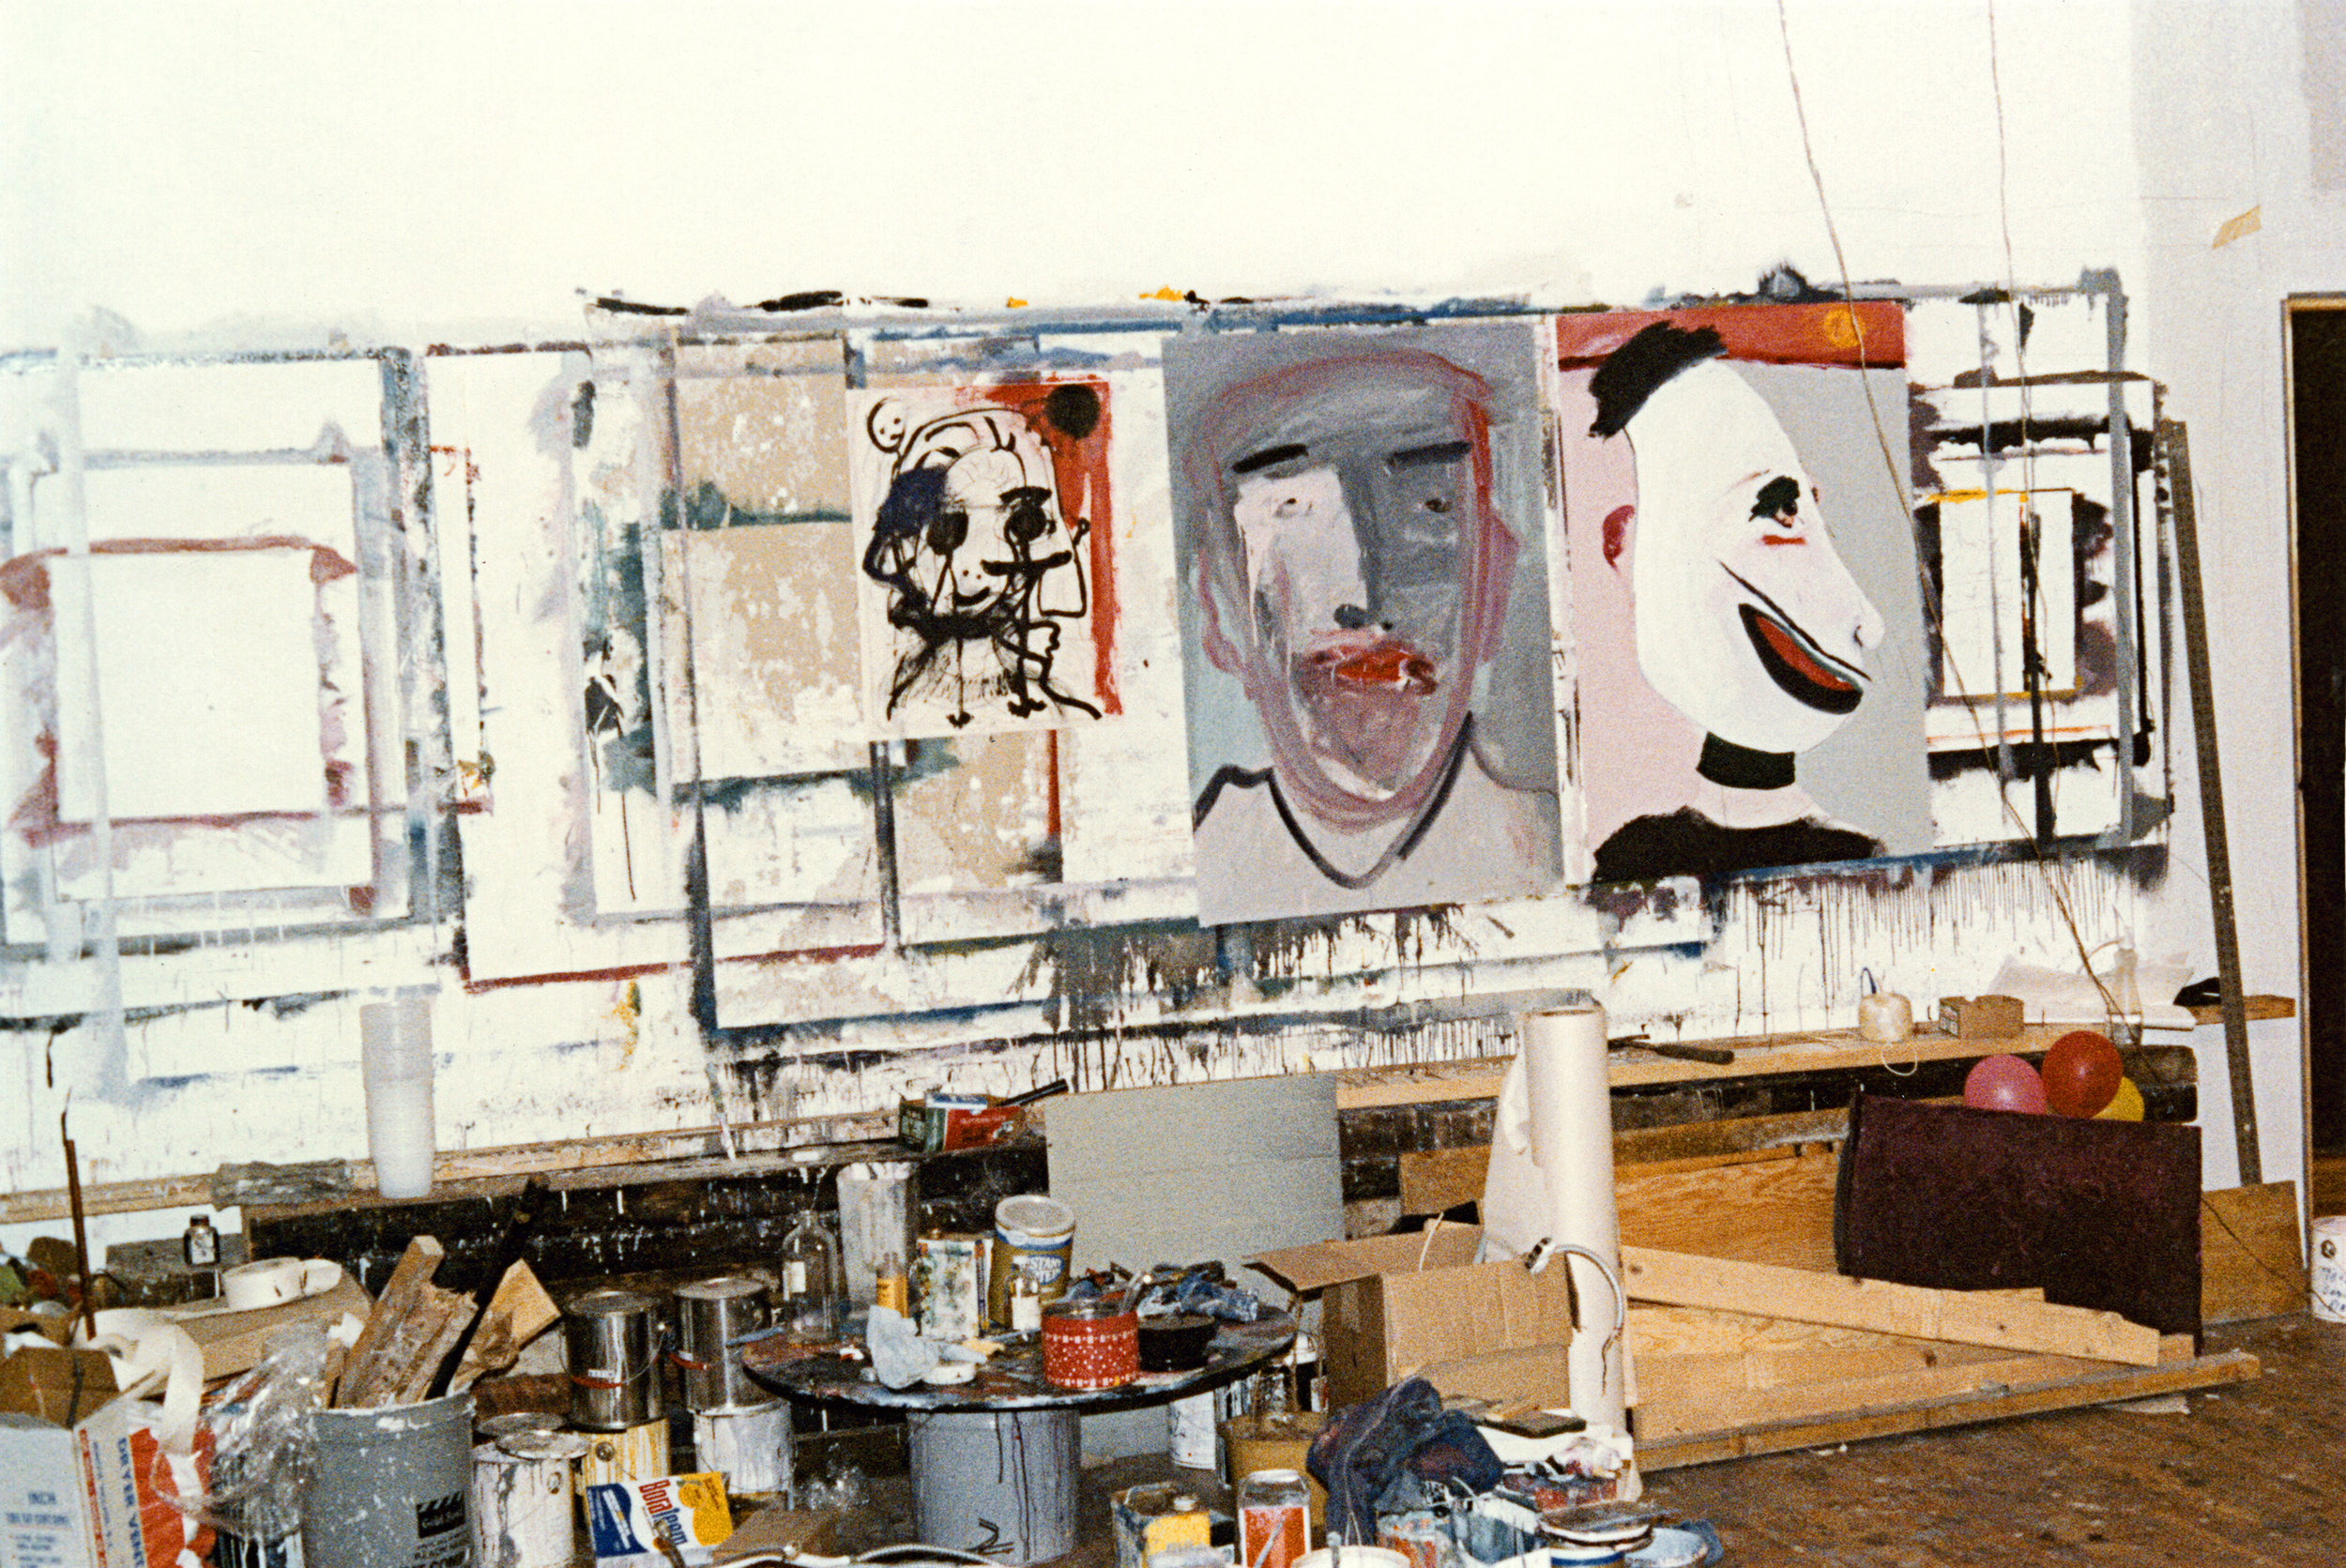  120 Wooster Street Loft Studio featuring untitled works and  The Clown  (left to right), 1977 